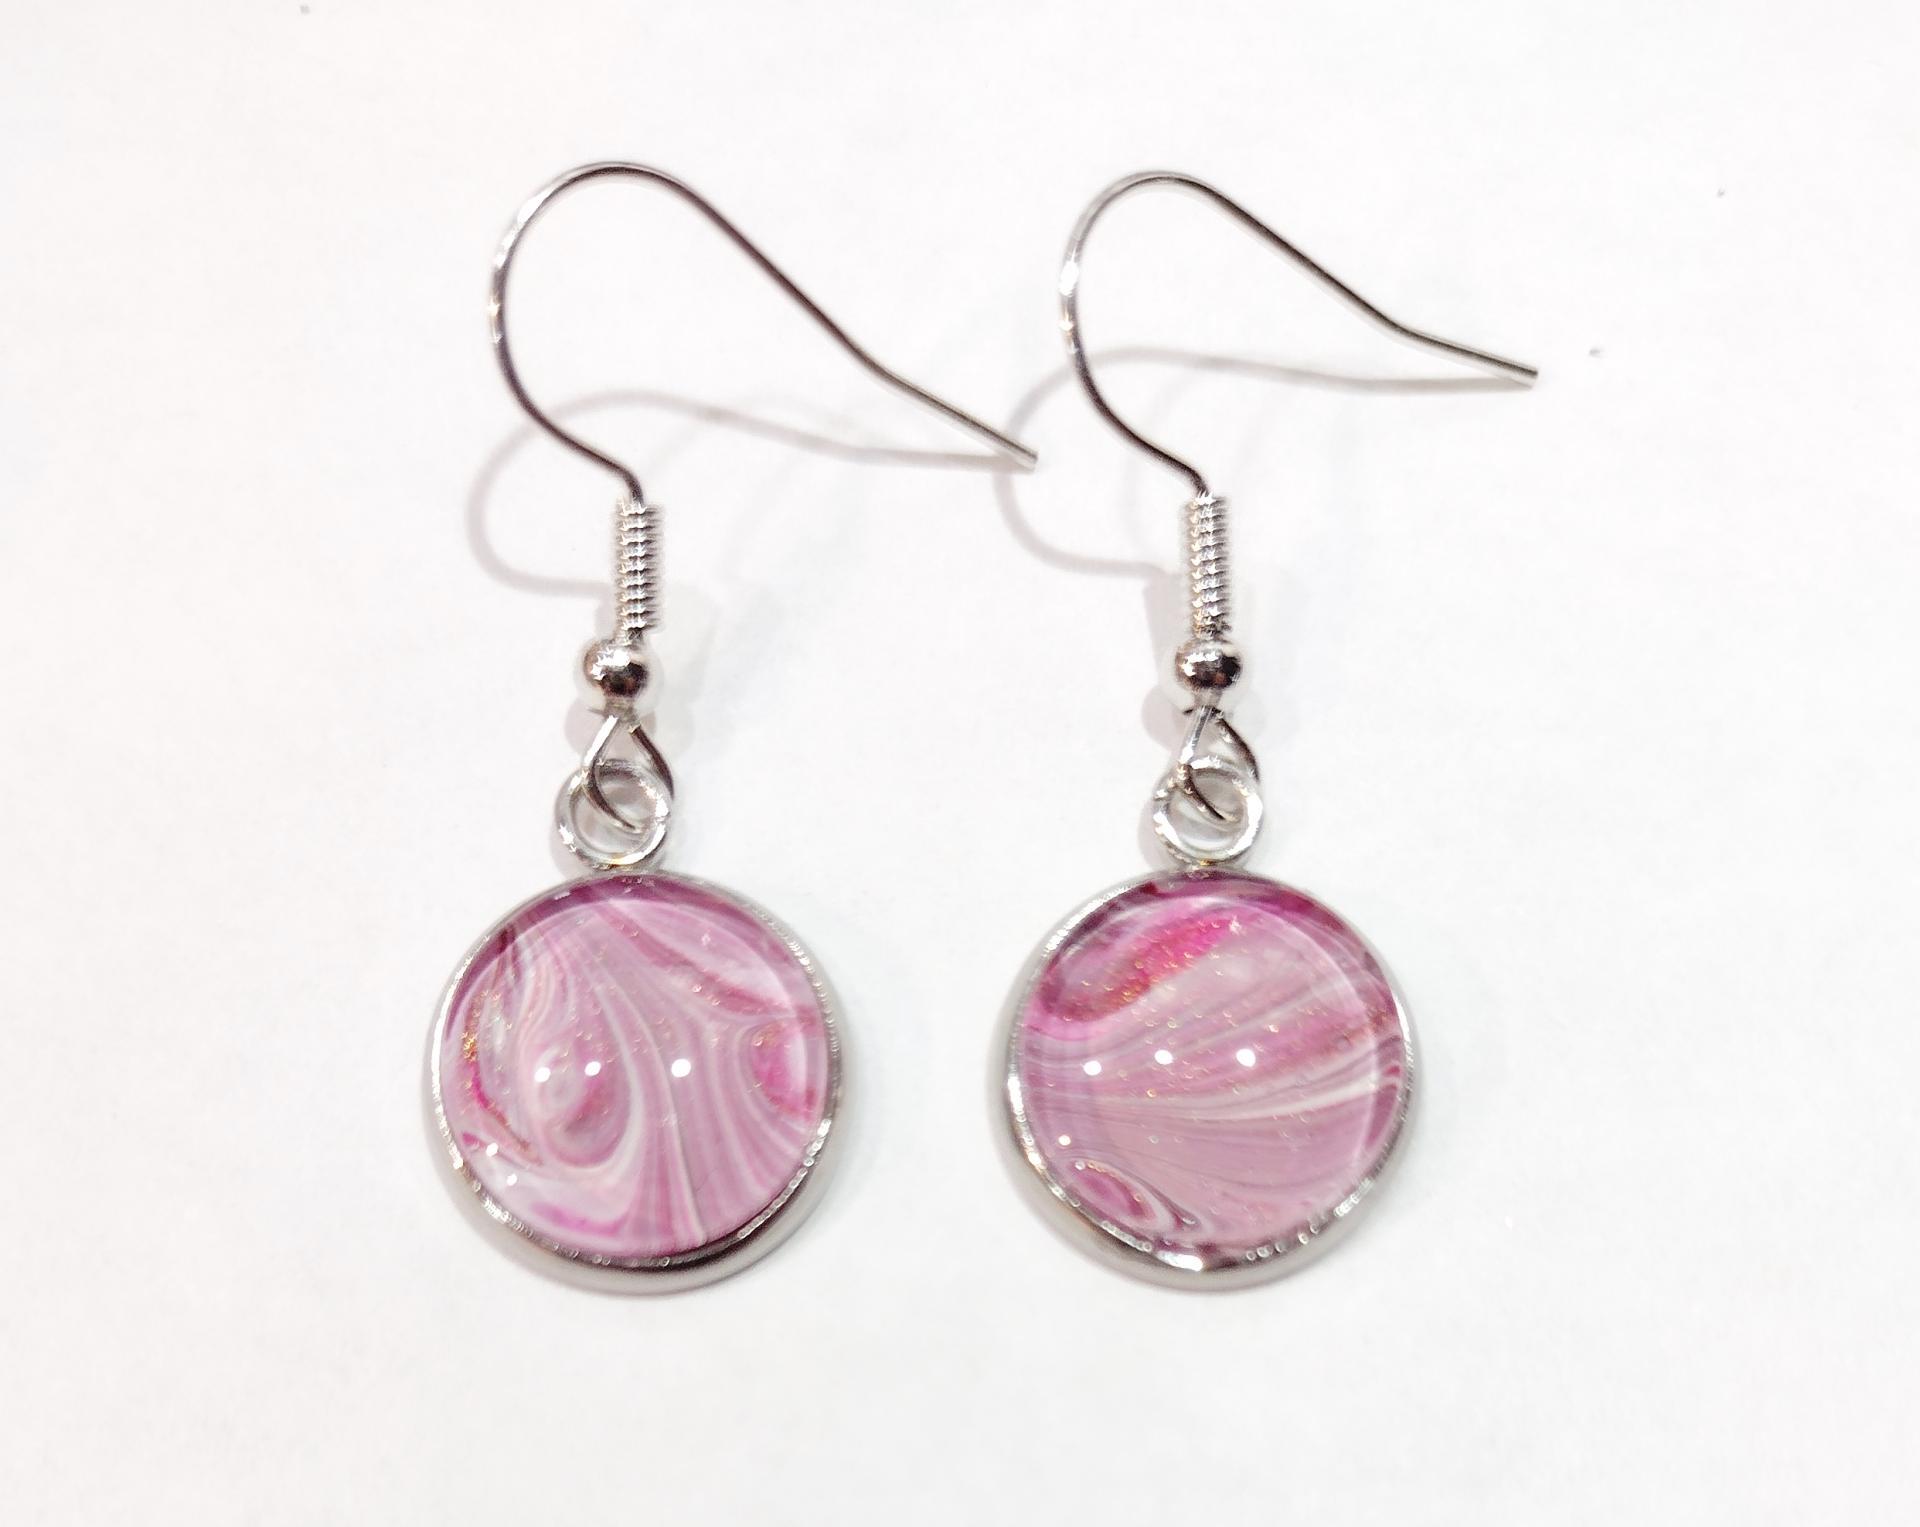 Painted Earrings, Pink and White Swirls